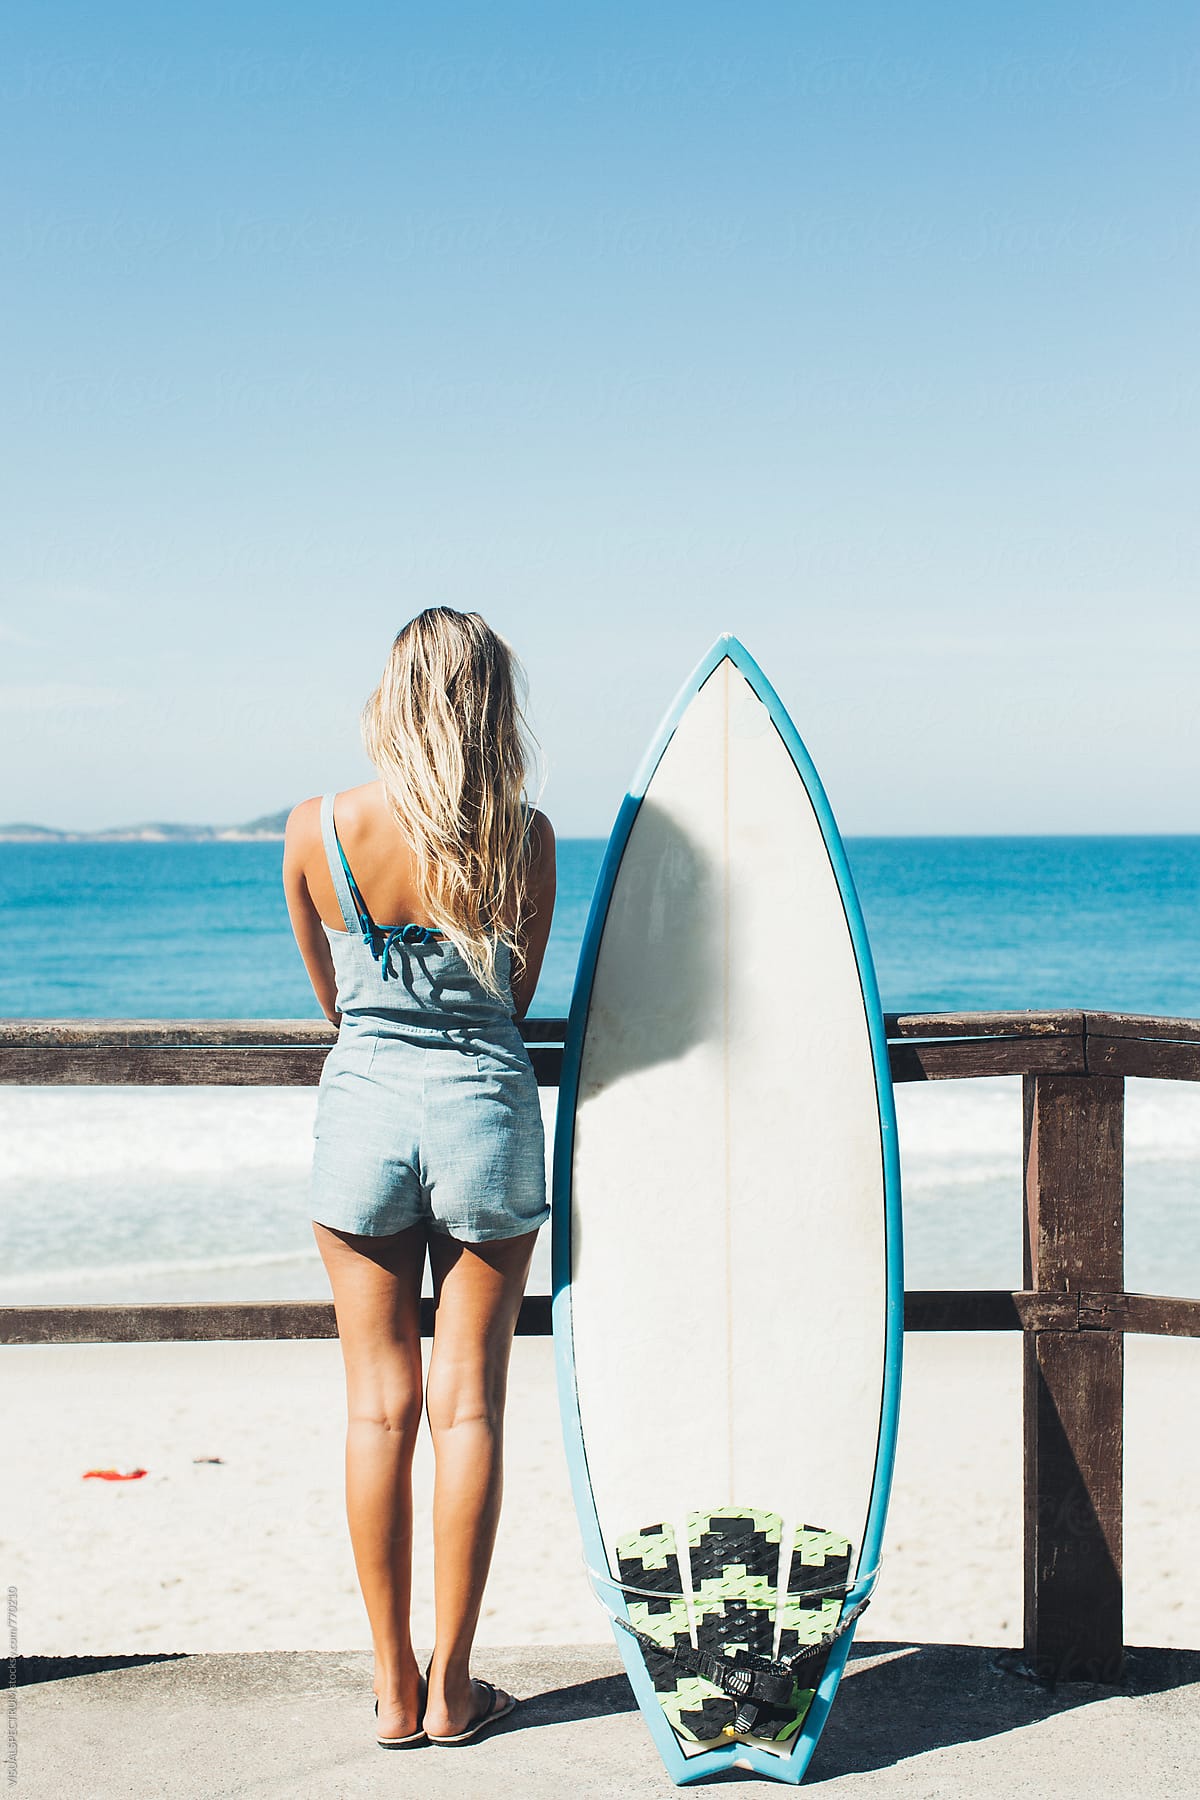 Blond Female Surfer Girl Standing Next To Surfboard On Ipanema Beach In Rio De Janeiro By